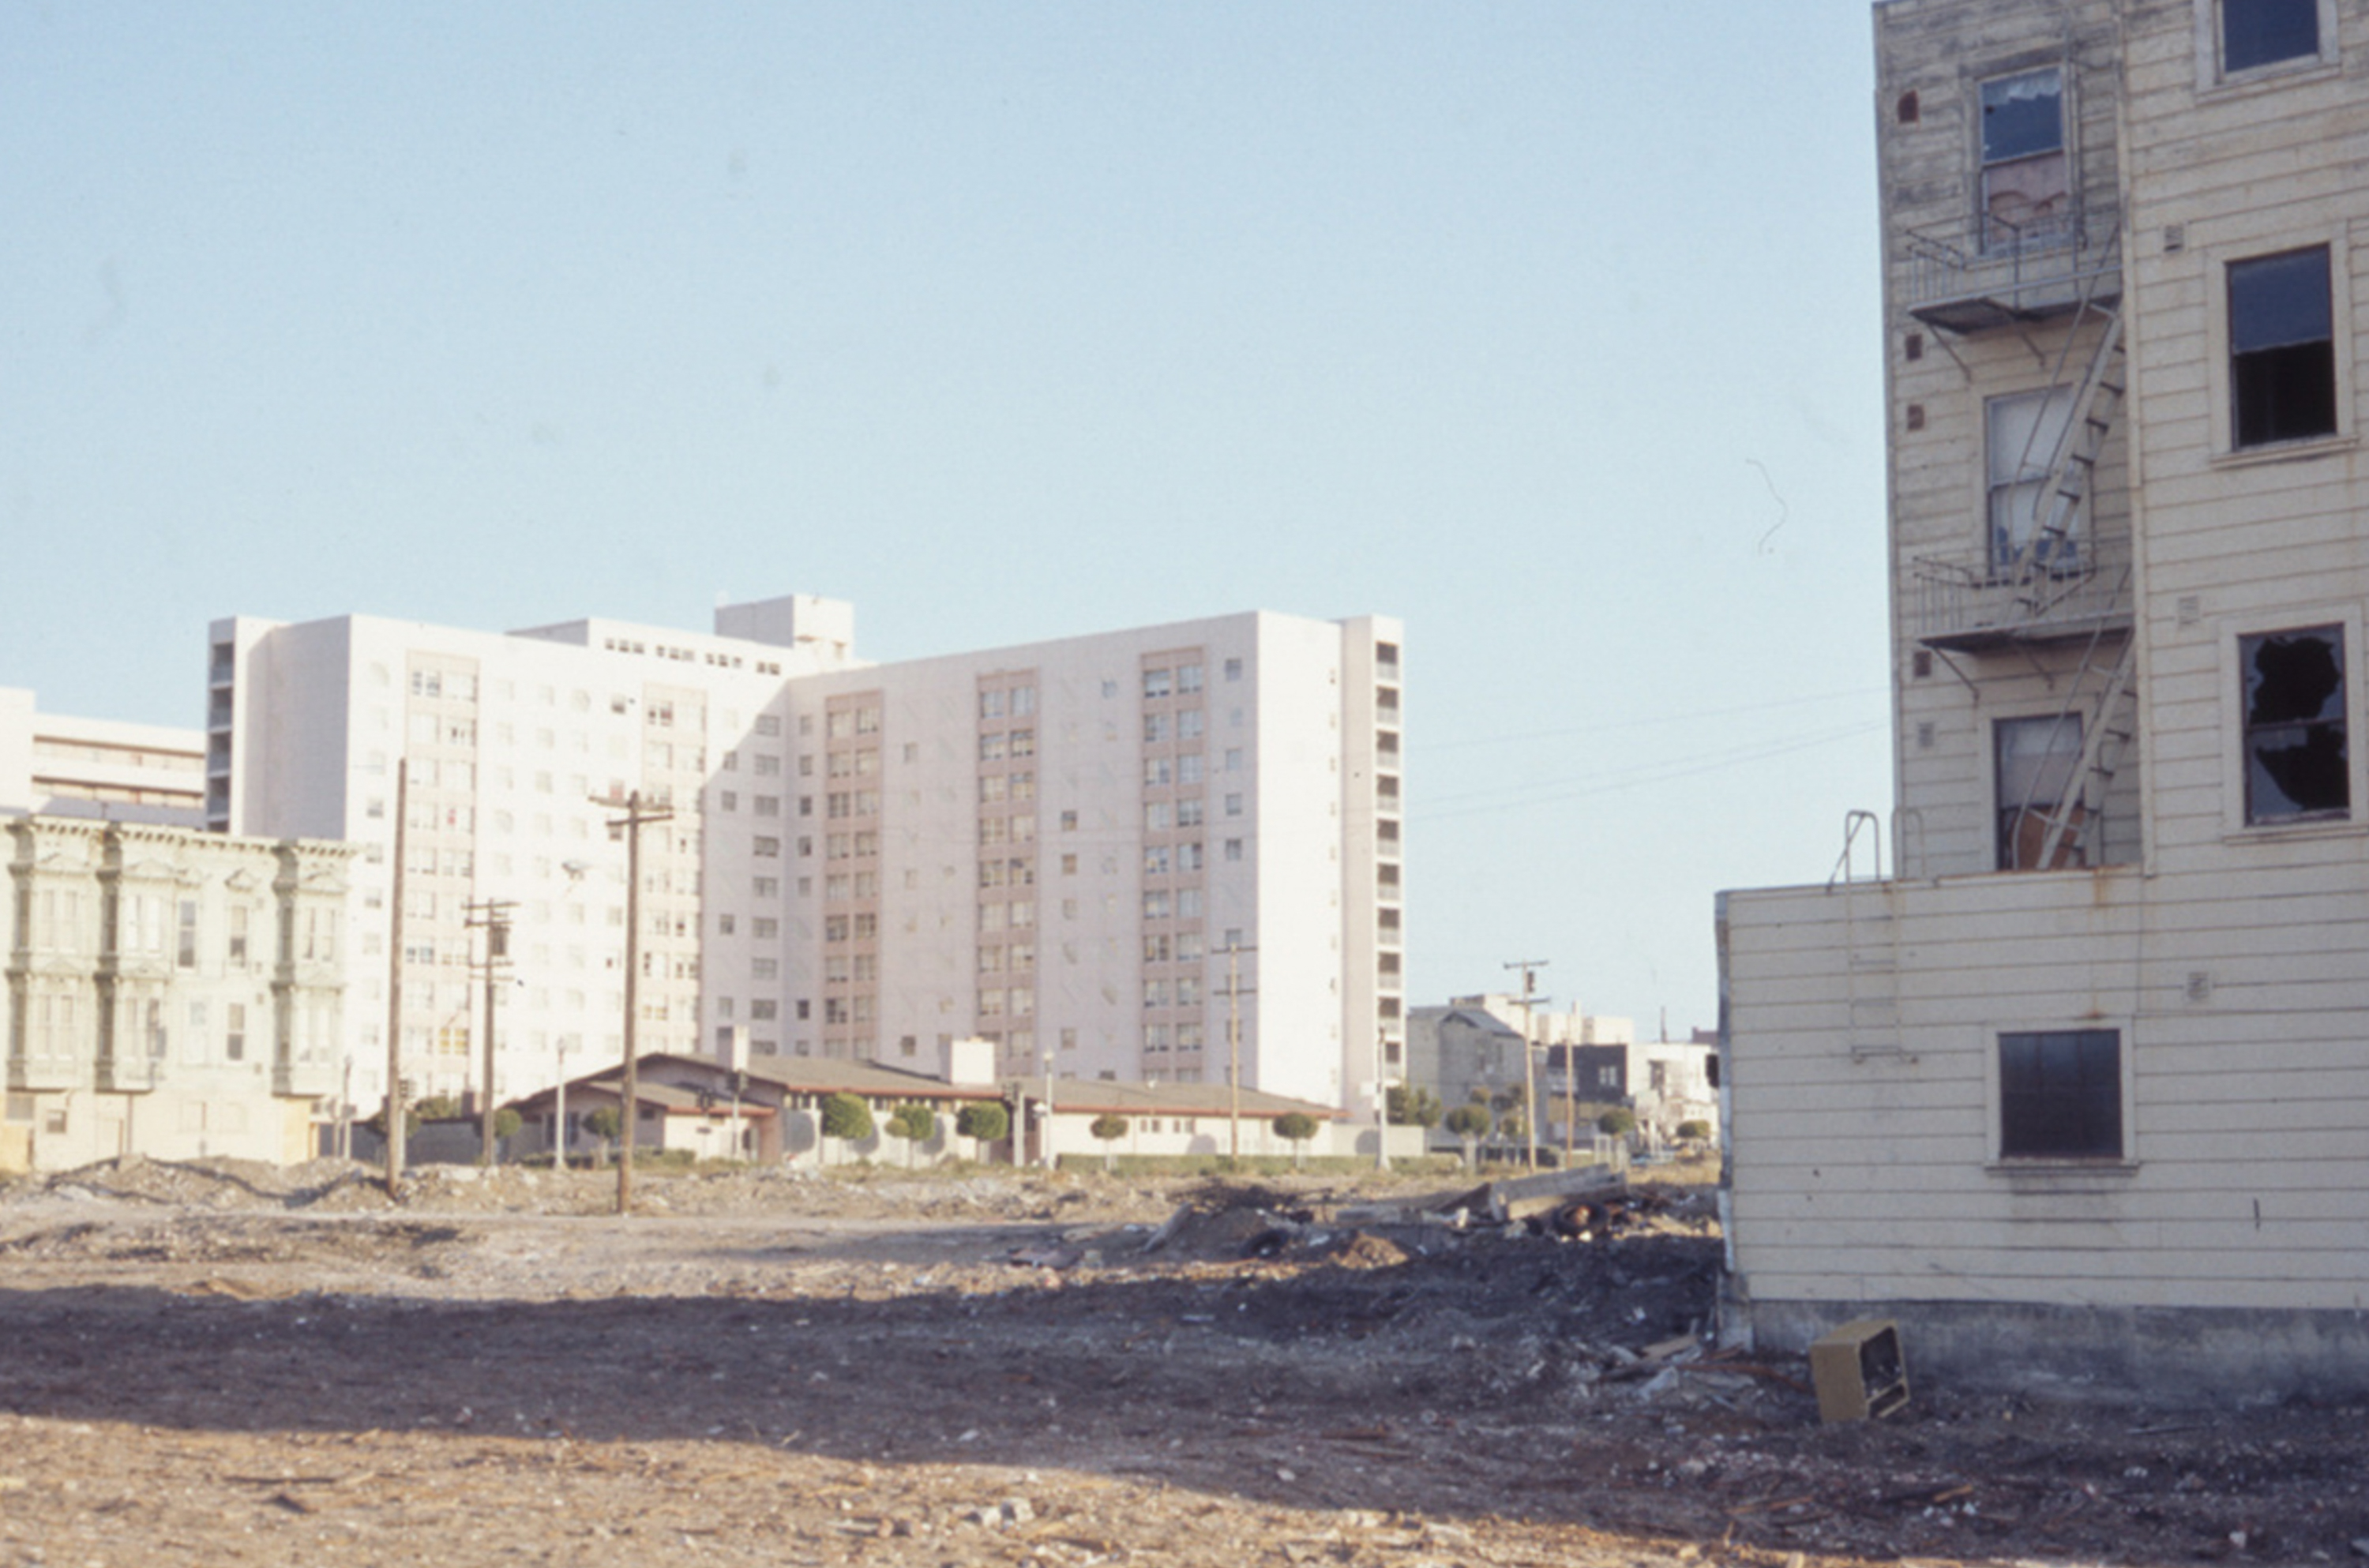 Apartment buildings behind a barren lot with debris, suggesting recent demolition or construction.